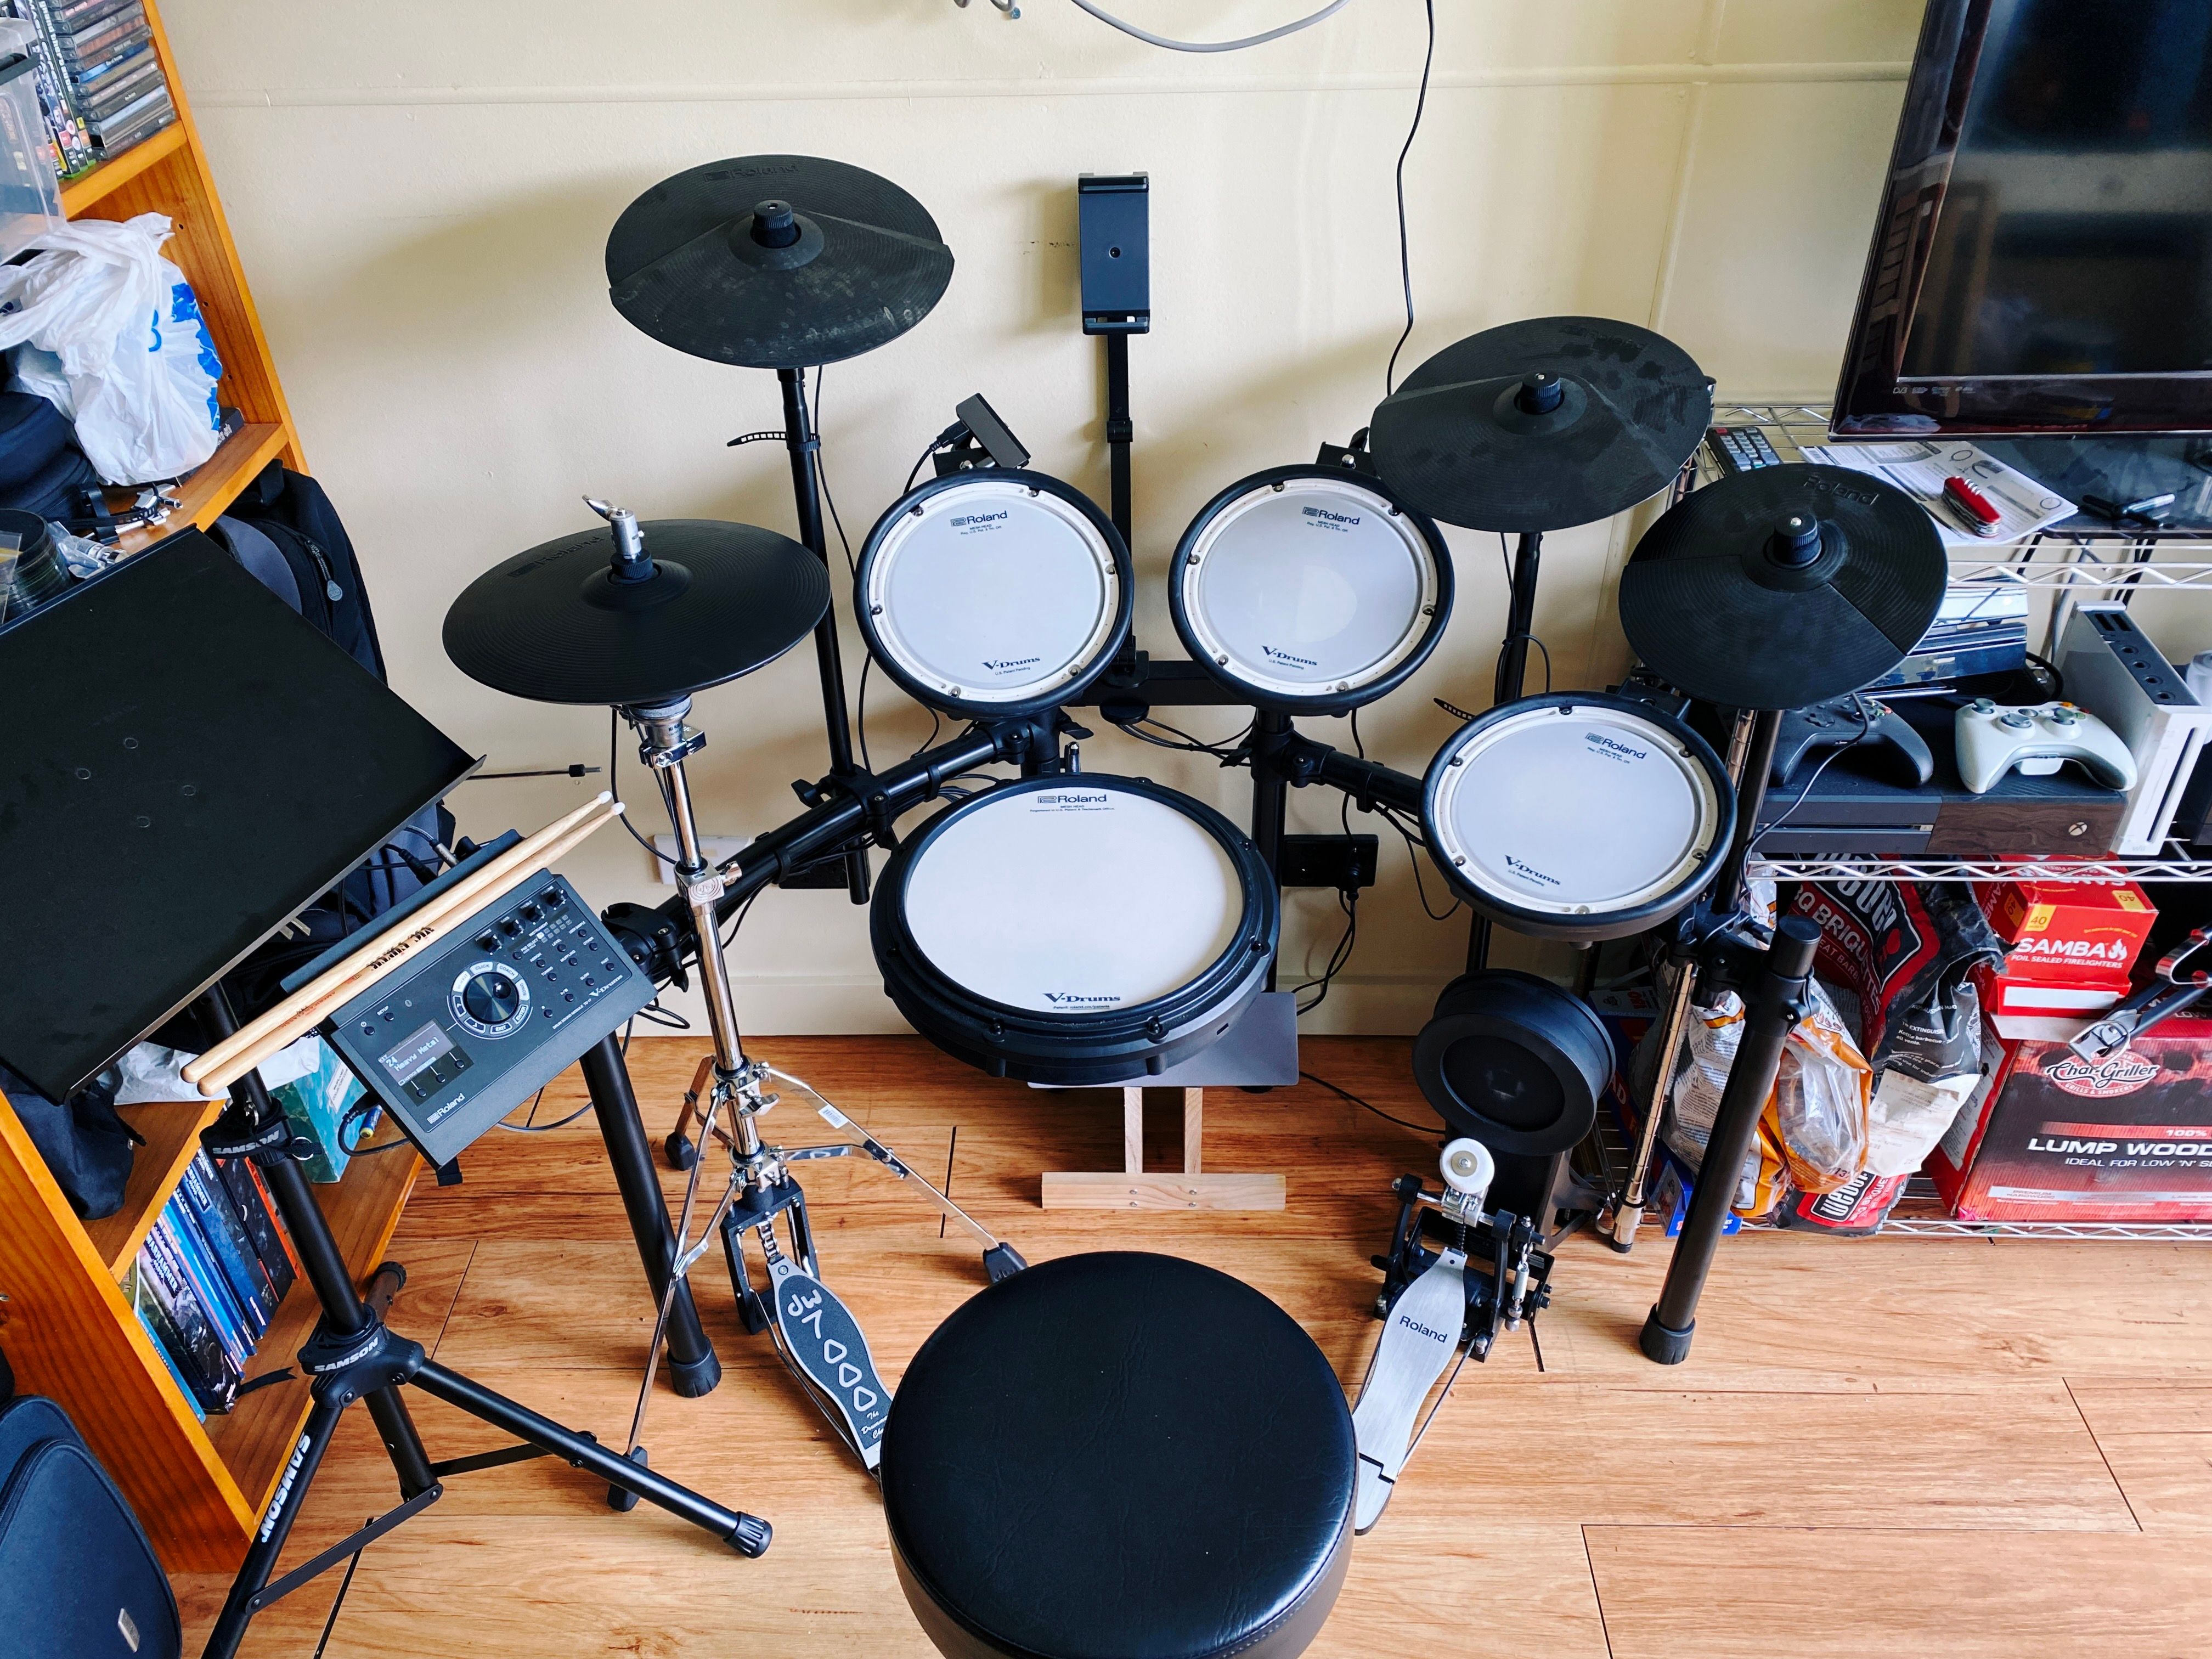 A photo of a Roland TV-17KV electronic drum kit that has a hi-hat mounted on an acoustic stand at the left, the standard crash and ride cymbals on the mid-left and mid-right respectively, and then the old hi-hat cymbal has been repurposed at the far right of the kit as a second crash cymbal.